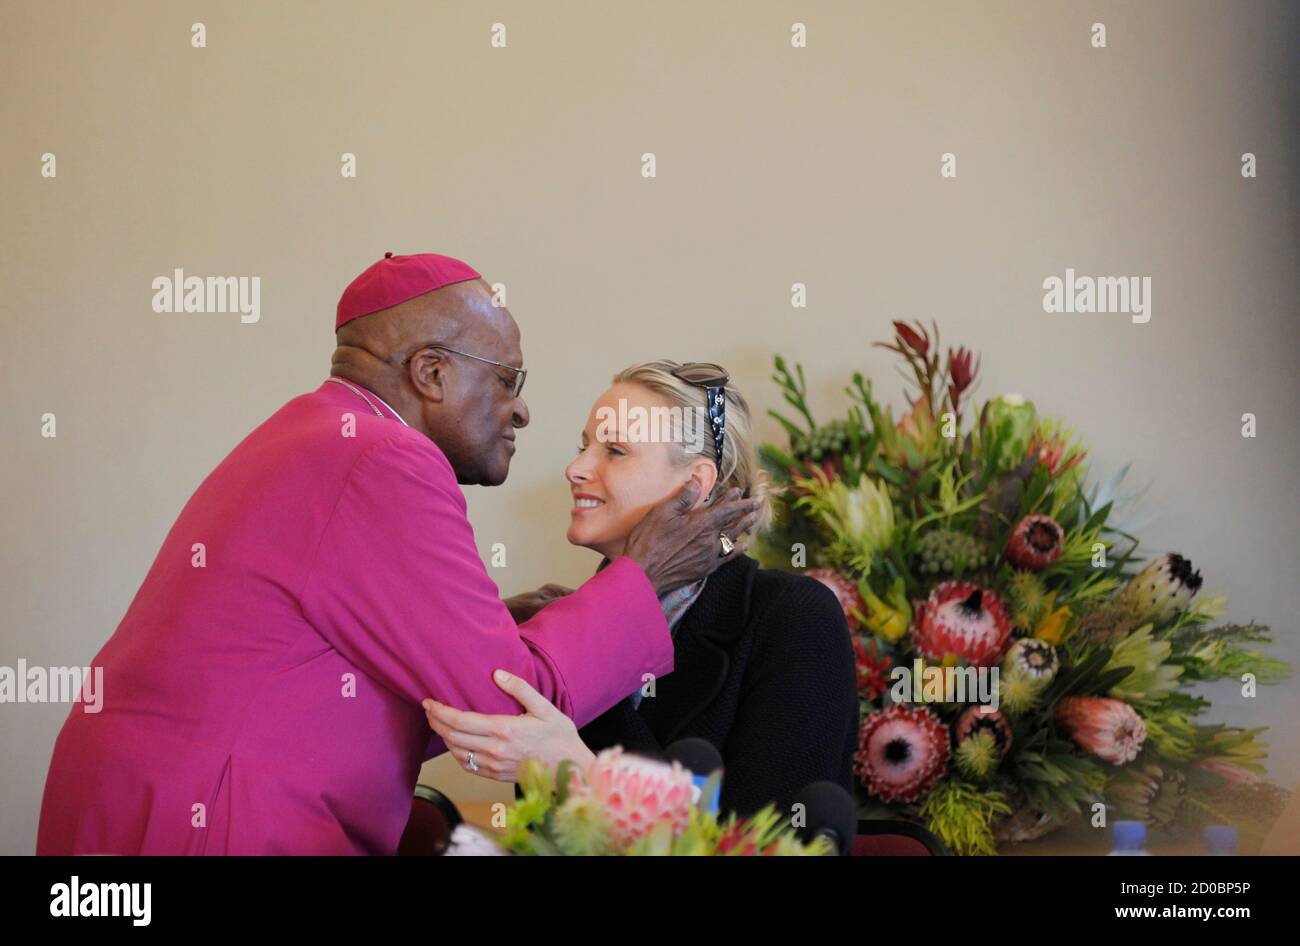 Archbishop Desmond Tutu welcomes Princess Charlene of Monaco during a visit  to the Desmond Tutu HIV Foundation youth centre in Masiphelele township  near Cape Town, July 8, 2011. REUTERS/Mike Hutchings (SOUTH AFRICA -